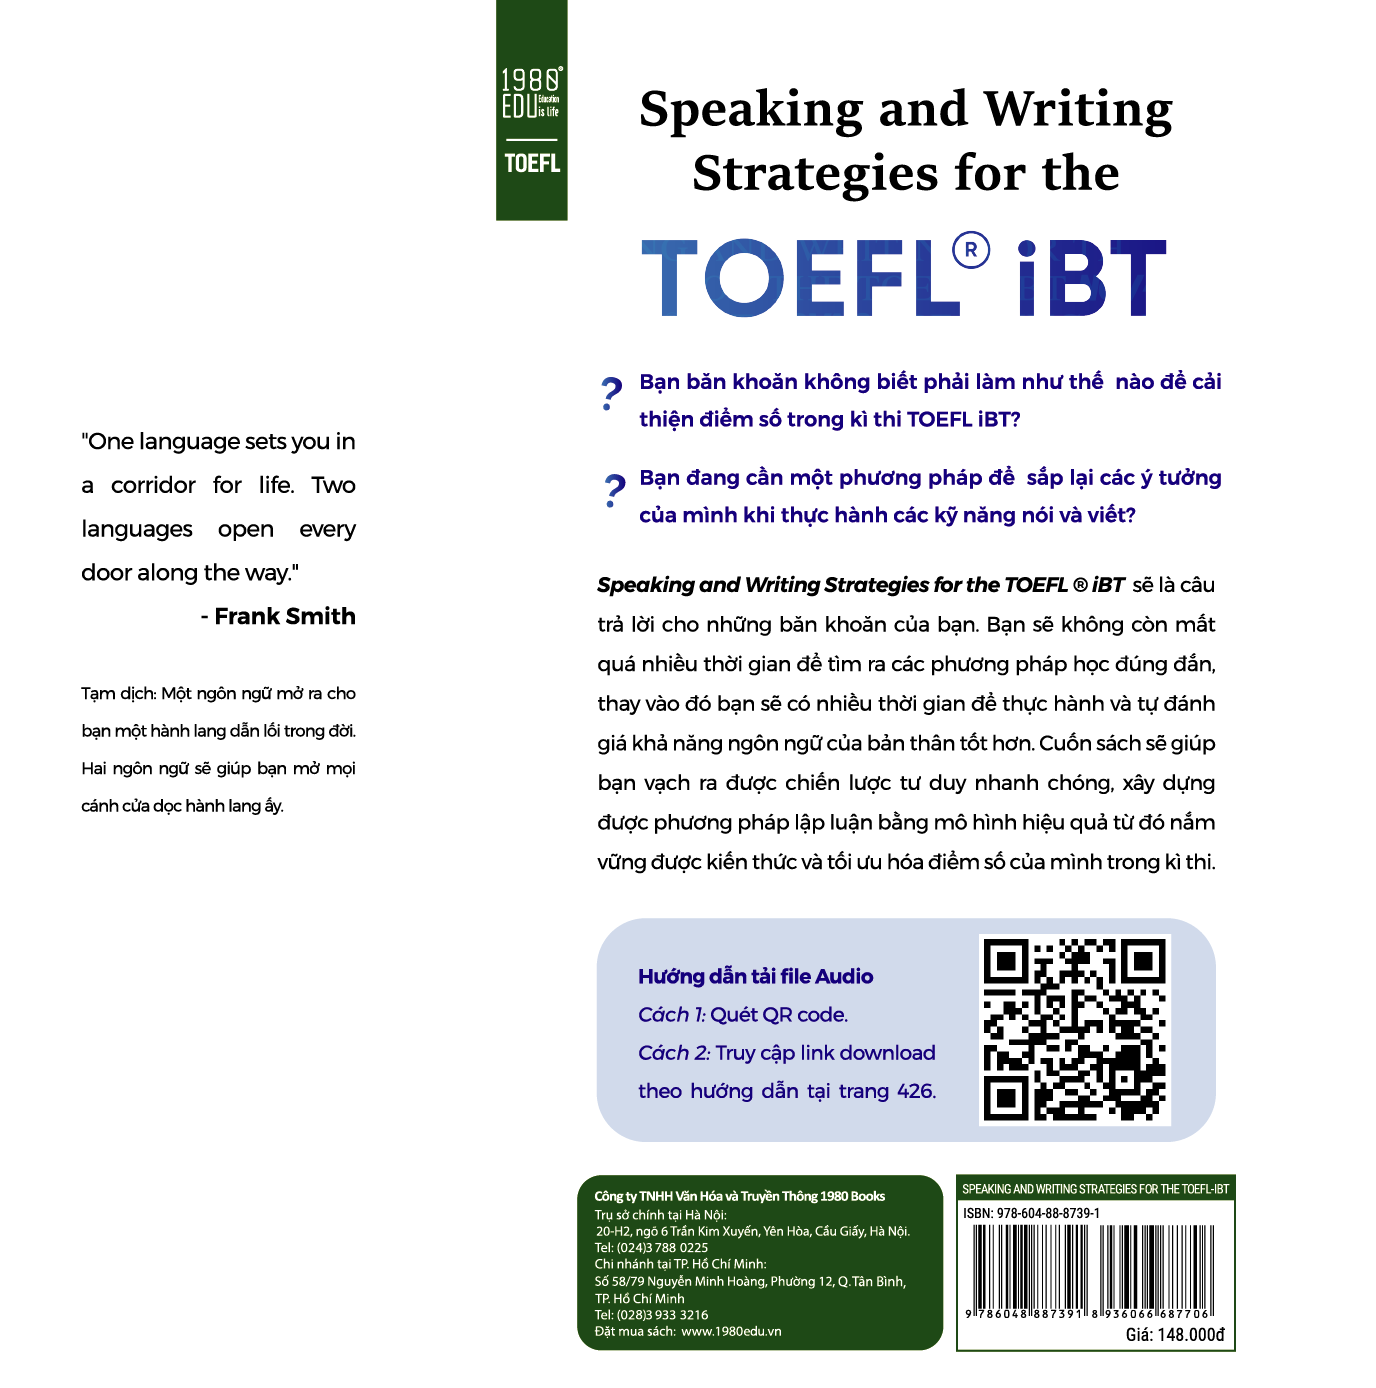 Speaking And Writing Strategies For The TOEFL - iBT PDF